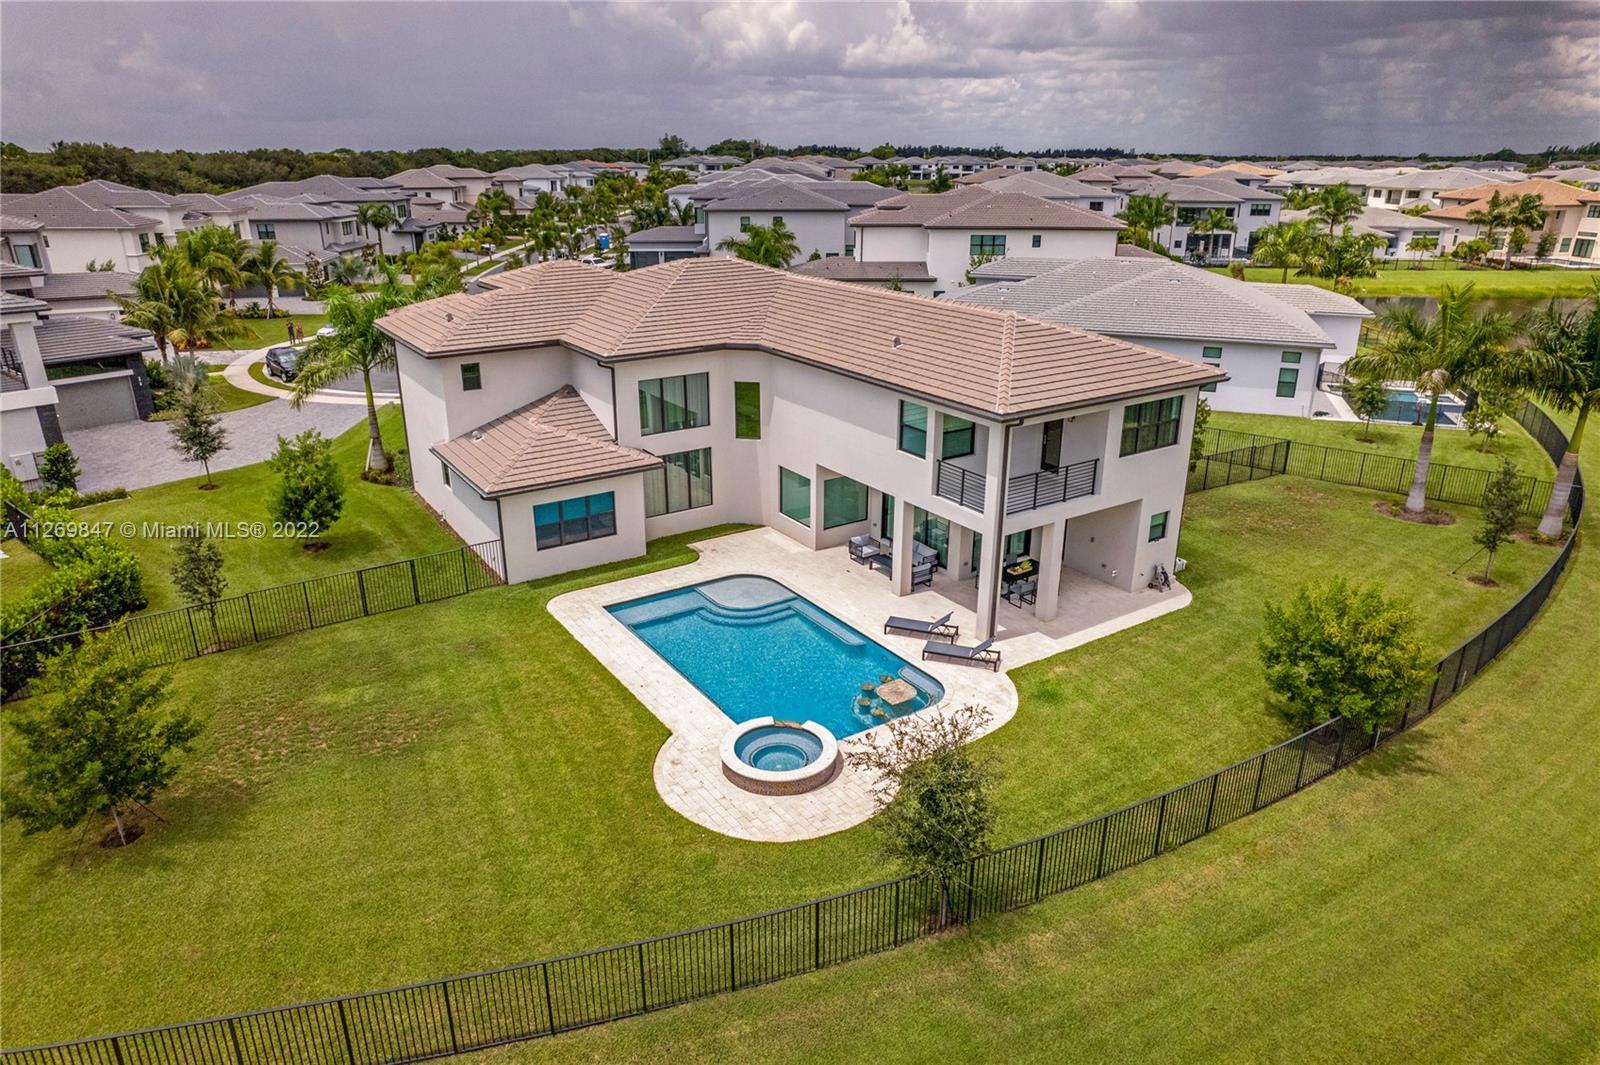 Turn Key - Furnished Contemporary Home located at the sought gated community of Boca Bridges in Boca